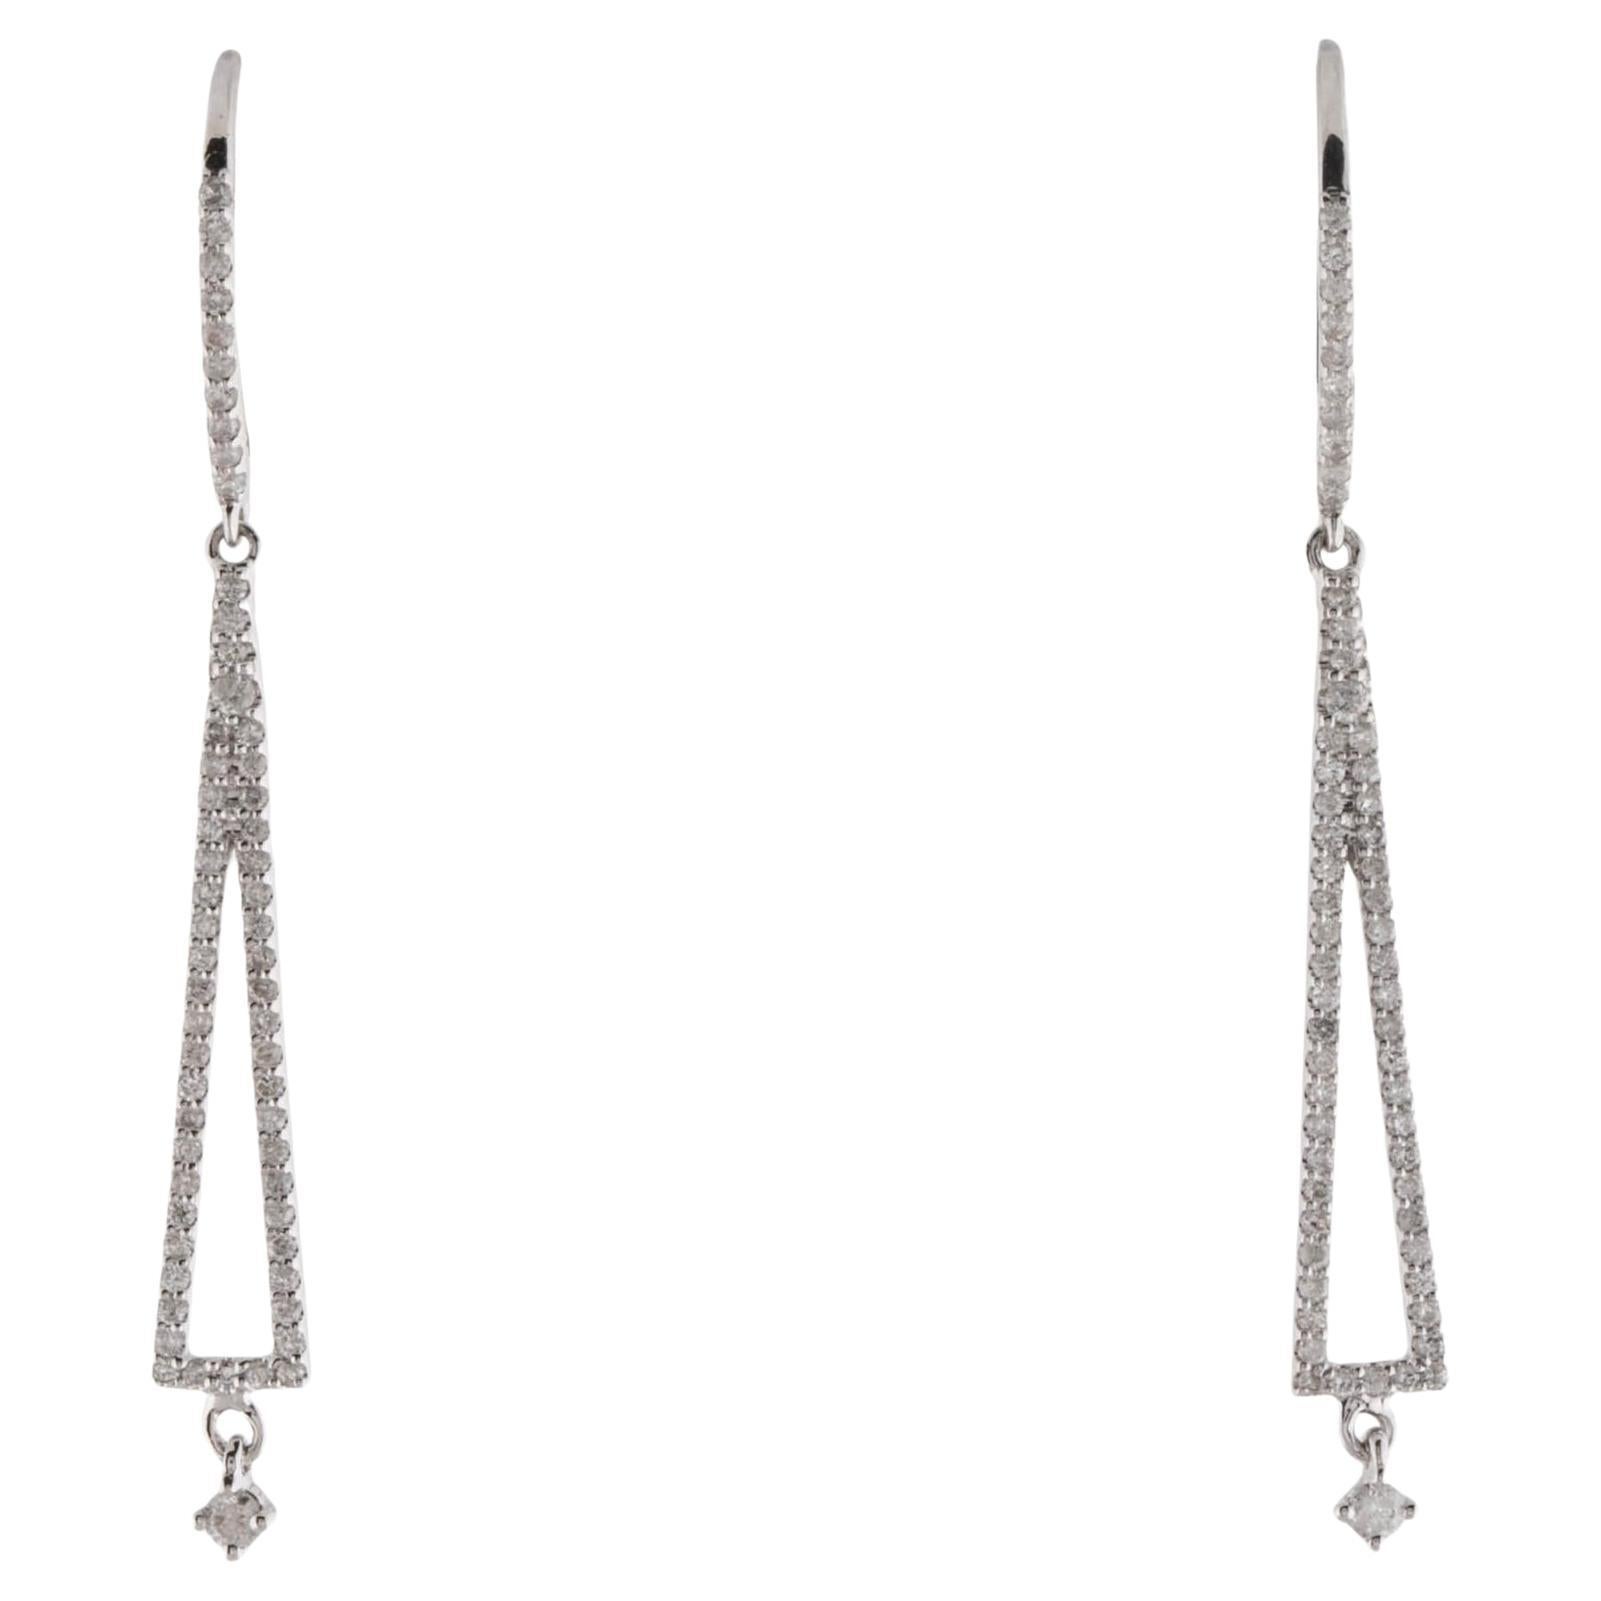 Luxurious 14K Diamond Drop Earrings - Exquisite Jewelry Style, Timeless Elegance For Sale